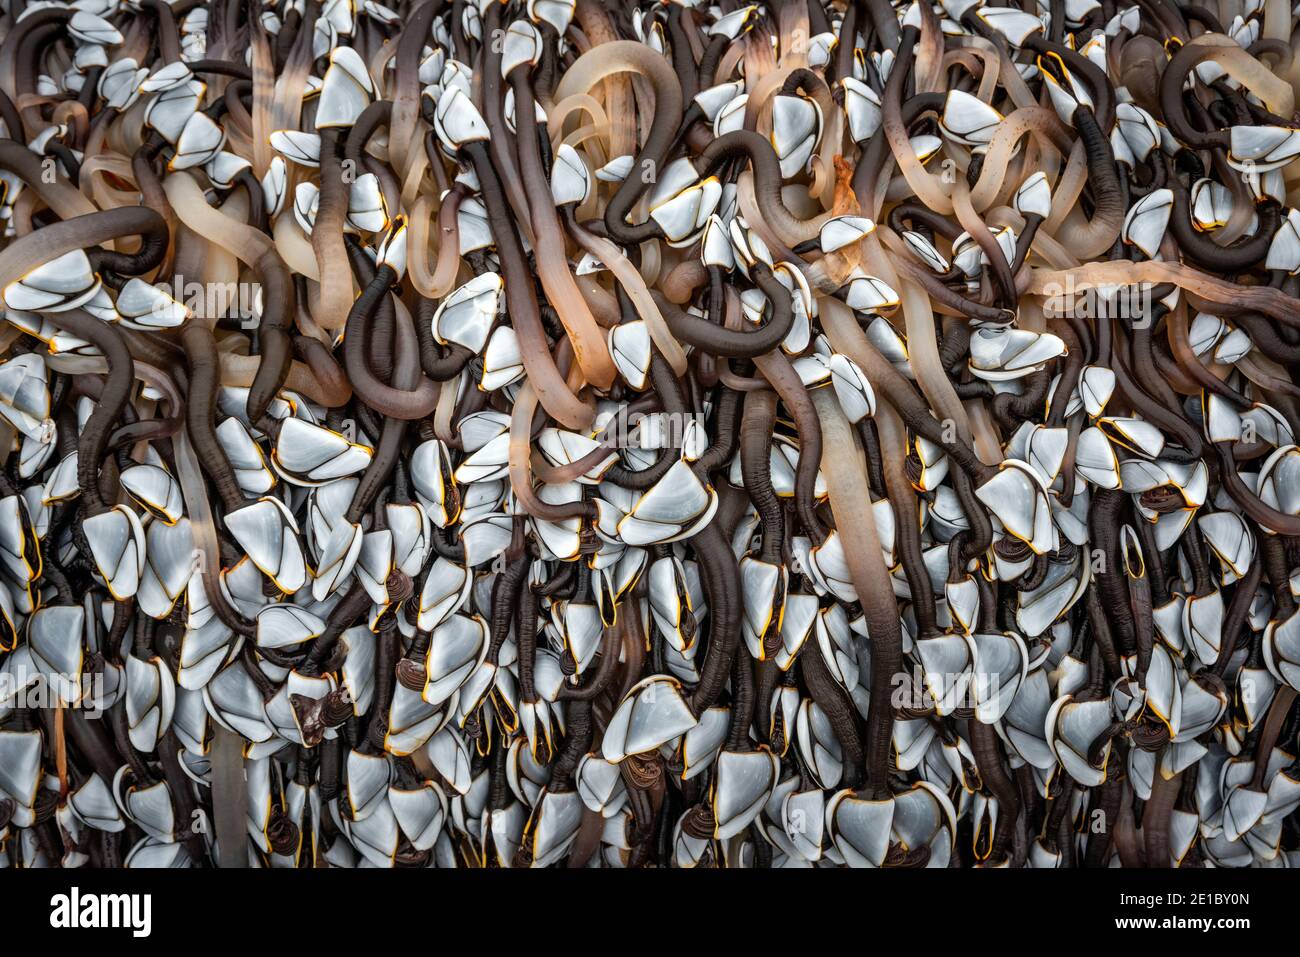 Thousands of Goose Barnacles (Pollicipes pollicipes) attached to a large piece of timber washed up on the beach at East Worthing, West Sussex, UK Stock Photo